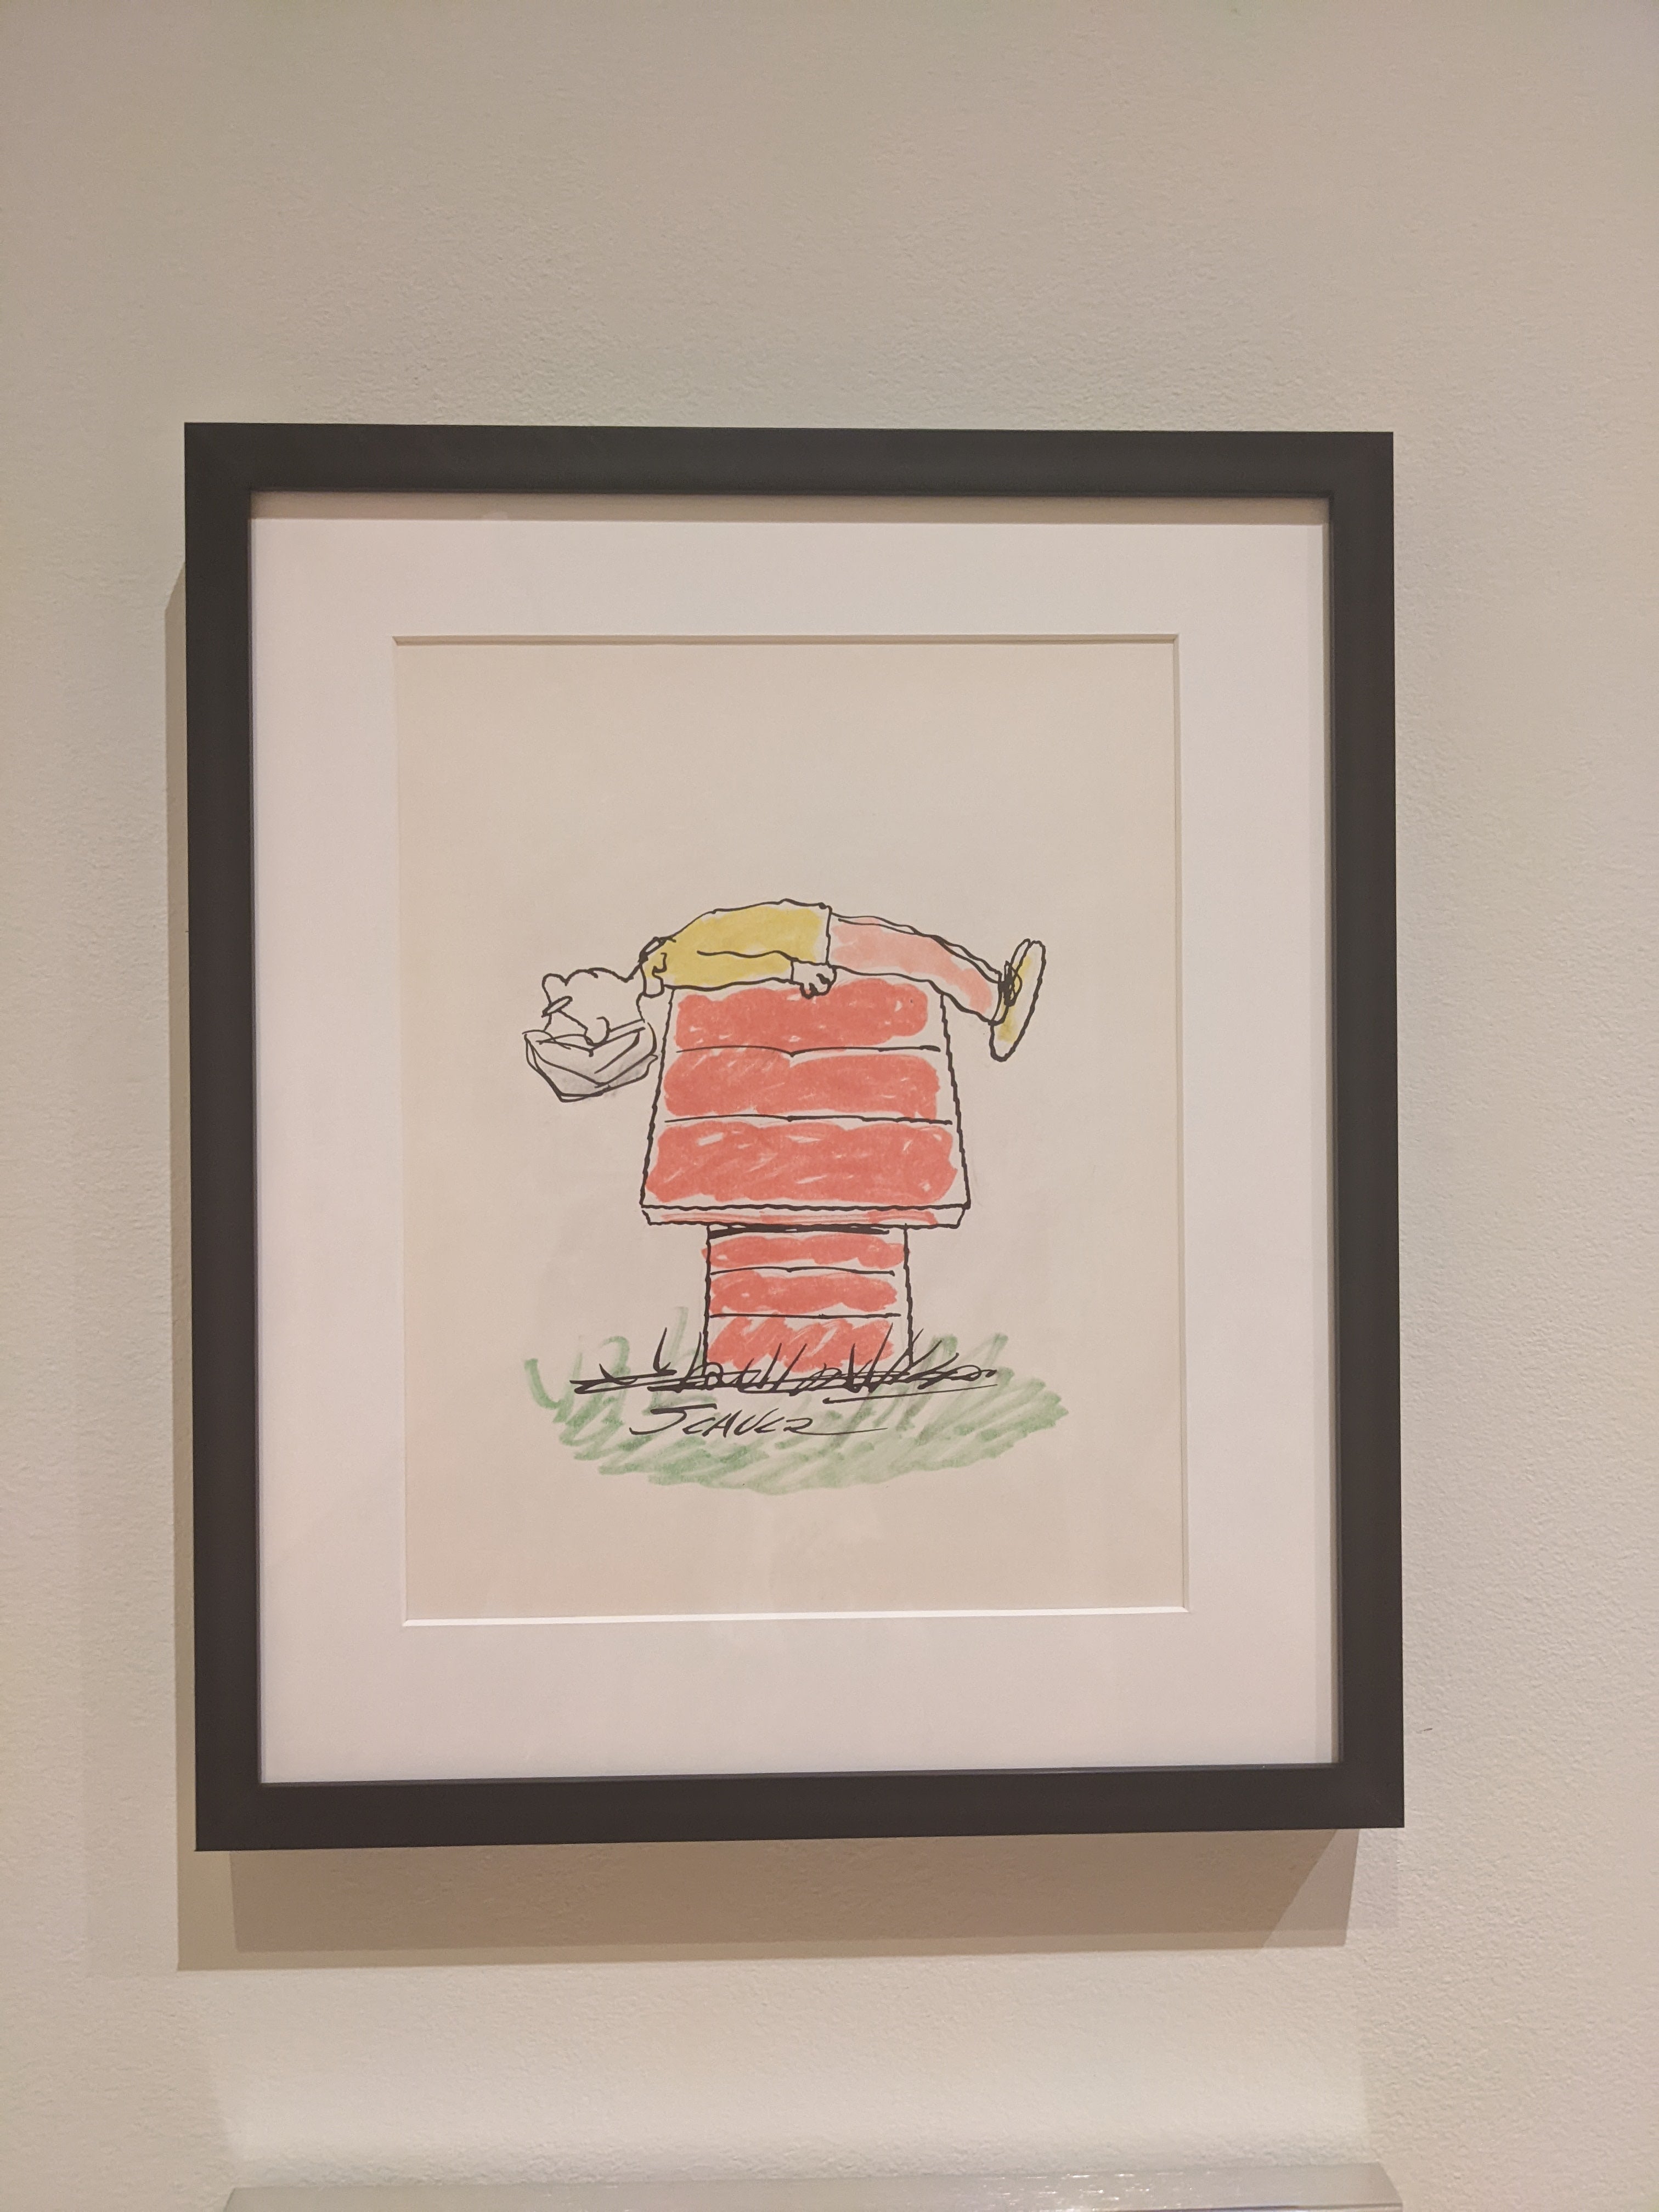 Photograph of a framed self portrait of Charles M. Schultz on Snoopy's doghouse